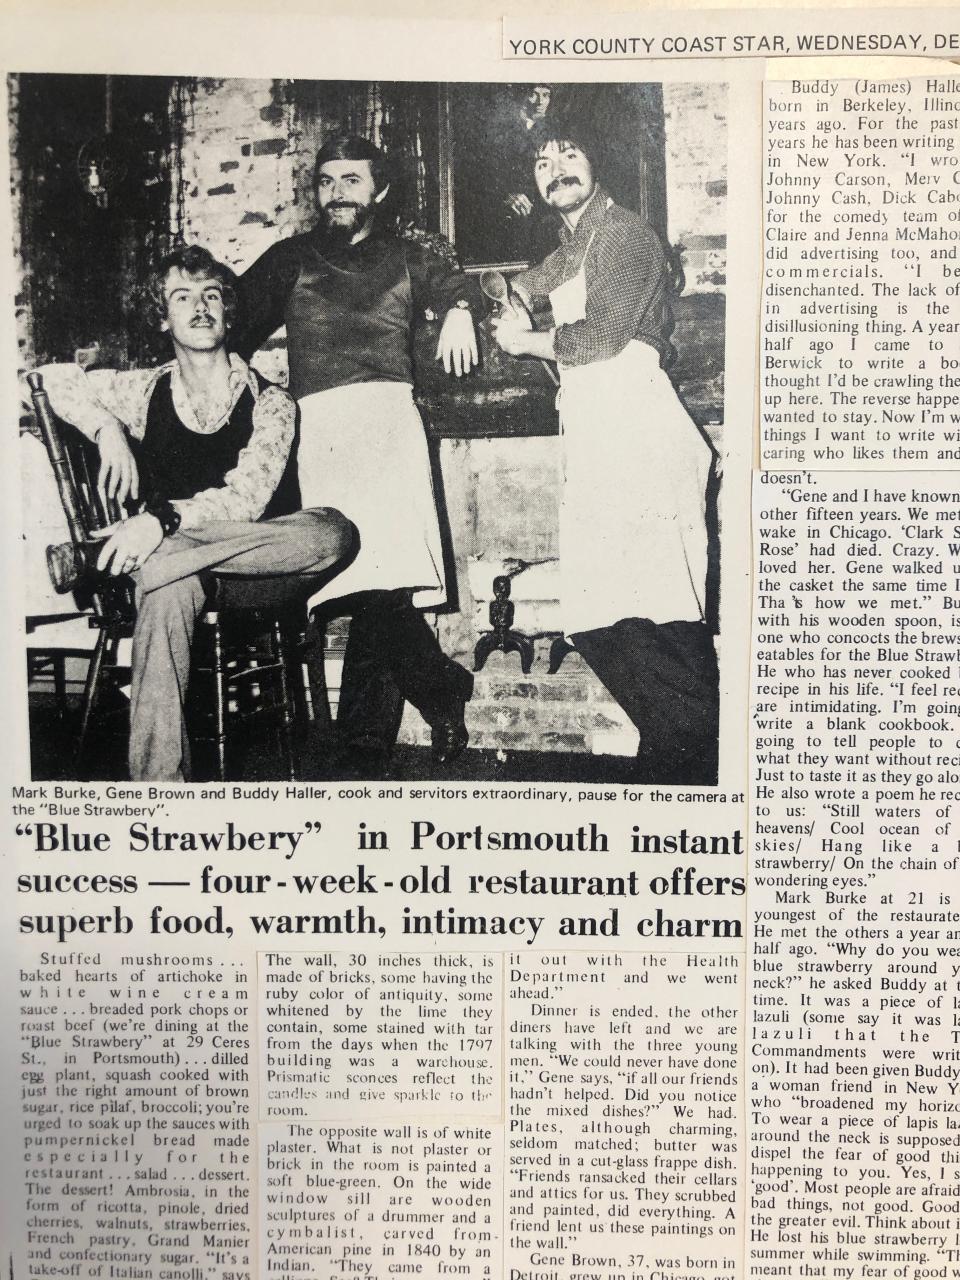 This Dec. 9, 1970 York County Coast Star article had high praise for the Blue Strawbery in Portsmouth, which had opened just weeks before. The clipping is one of many in the Athenaeum archives about the restaurant.